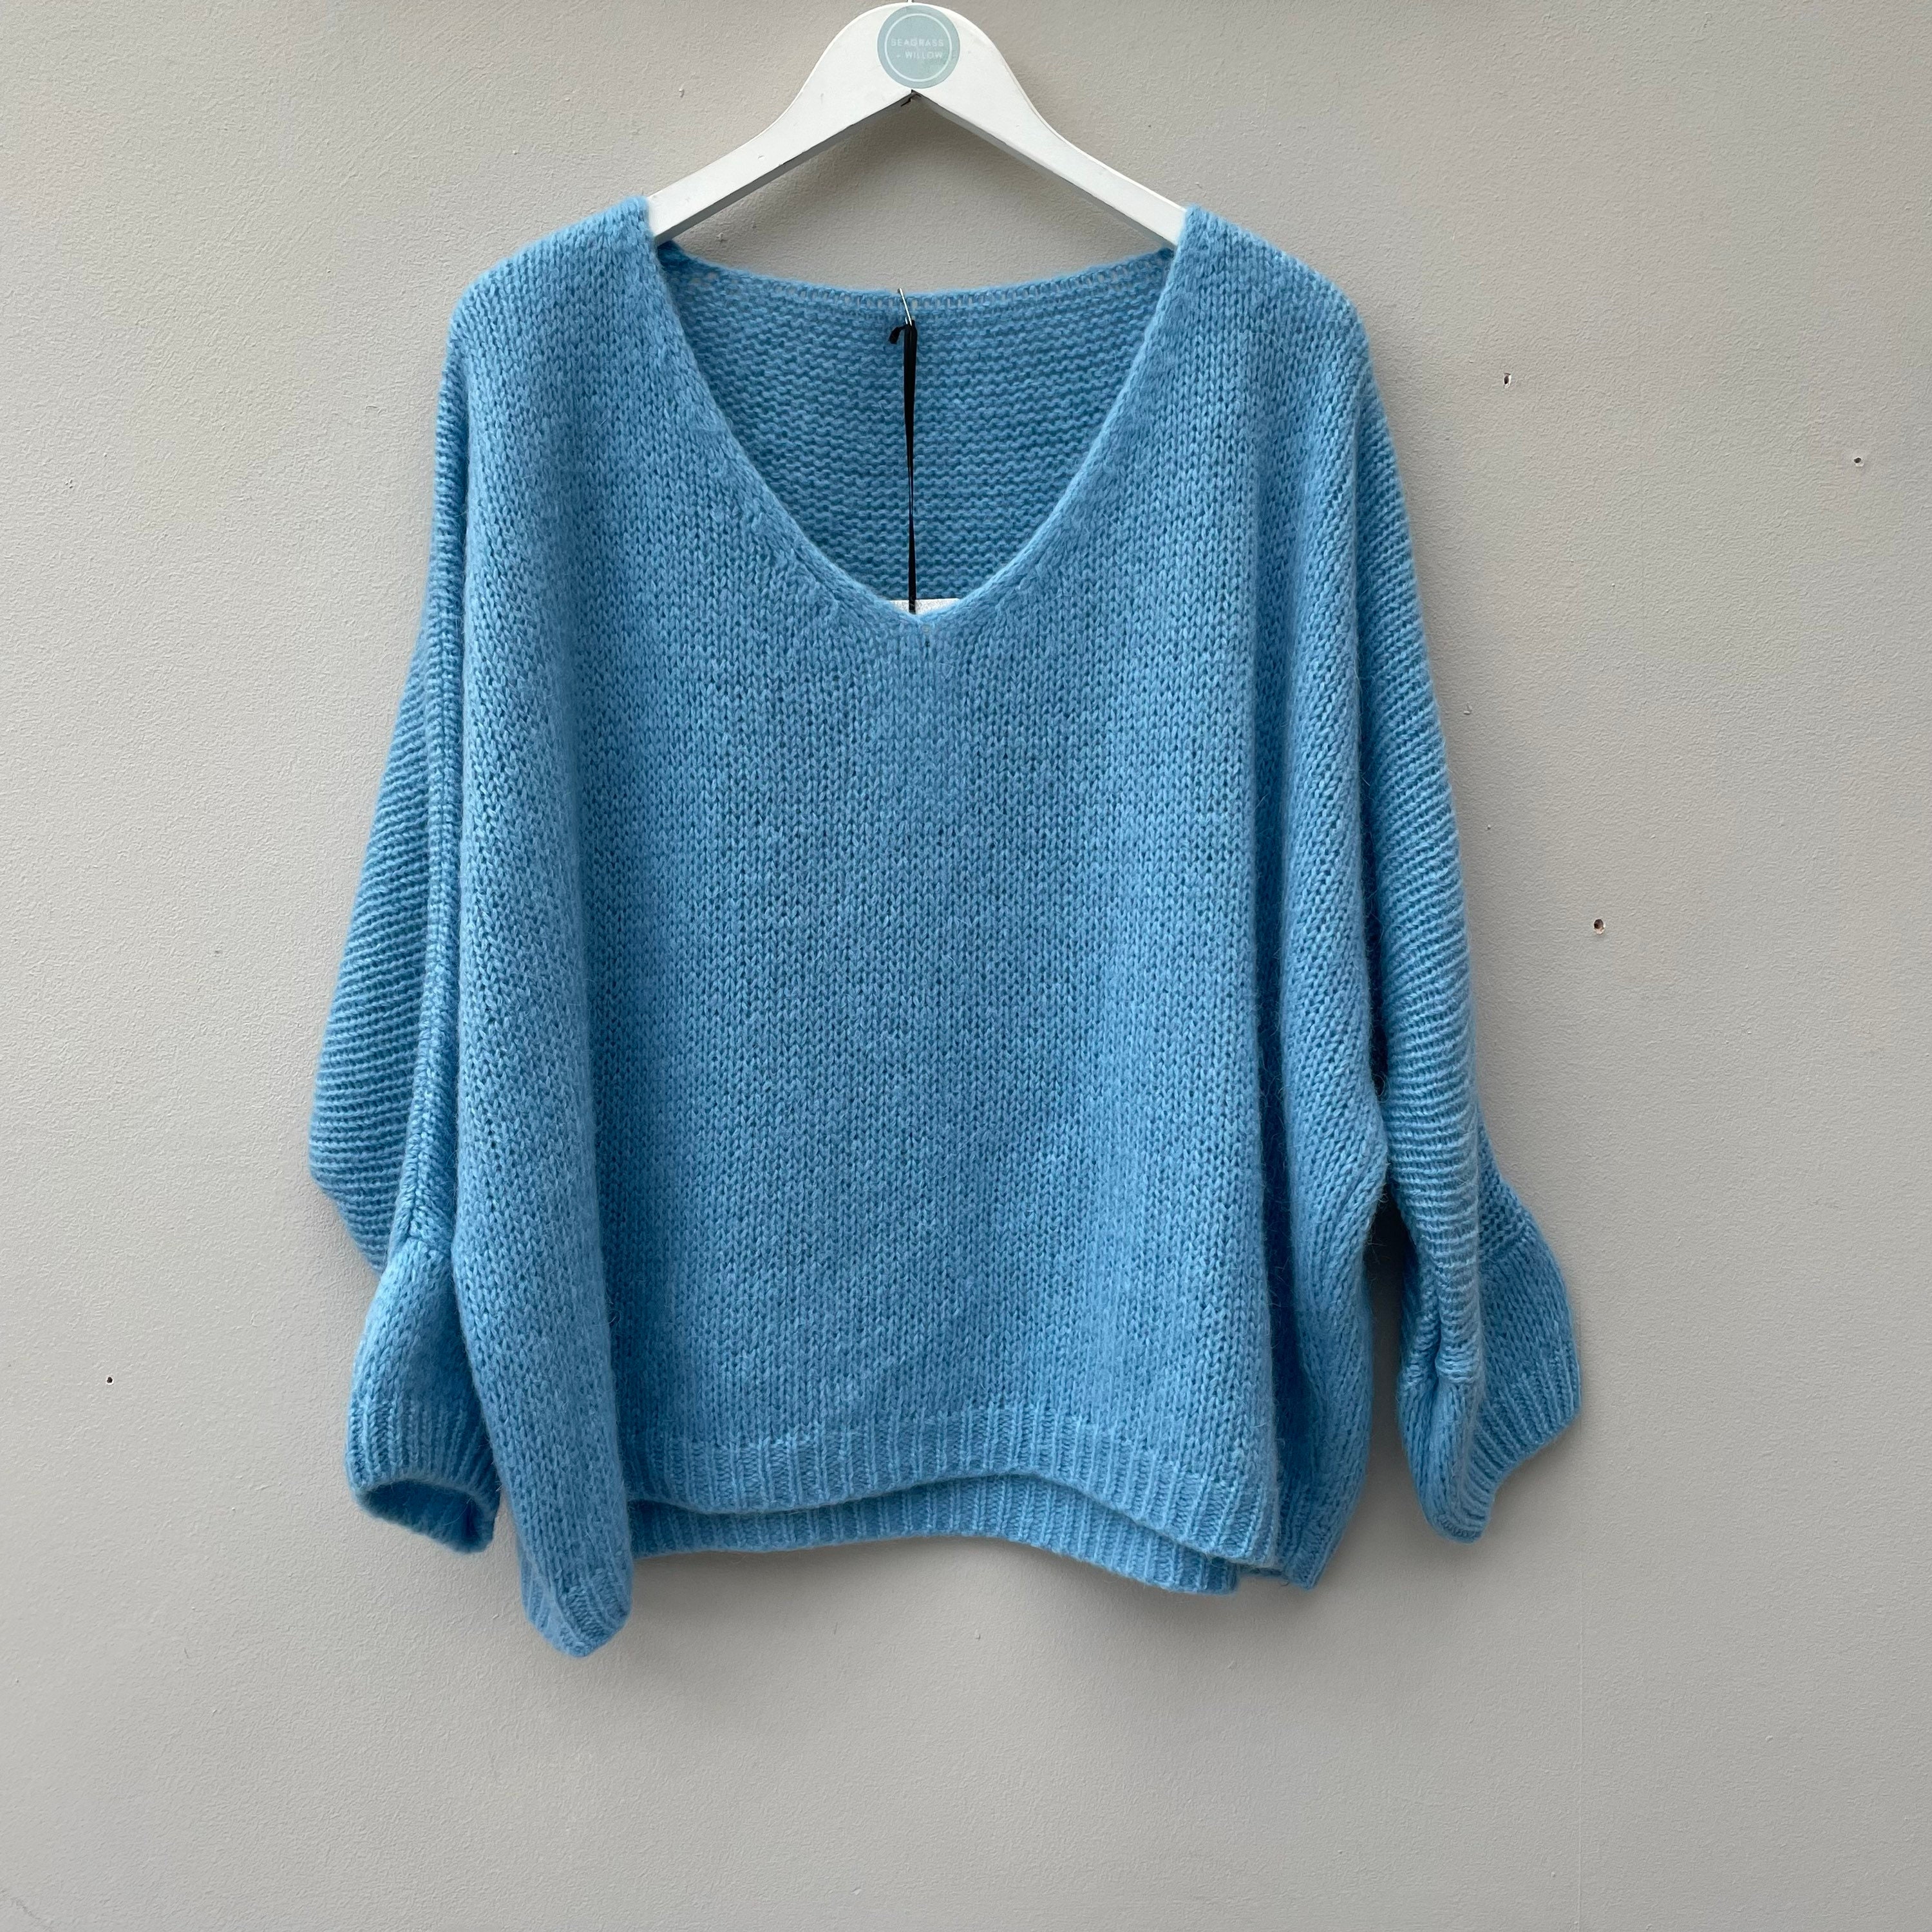 The Darcy Oversized Knit. Made in Italy Clothing. Knitwear. | Etsy Canada